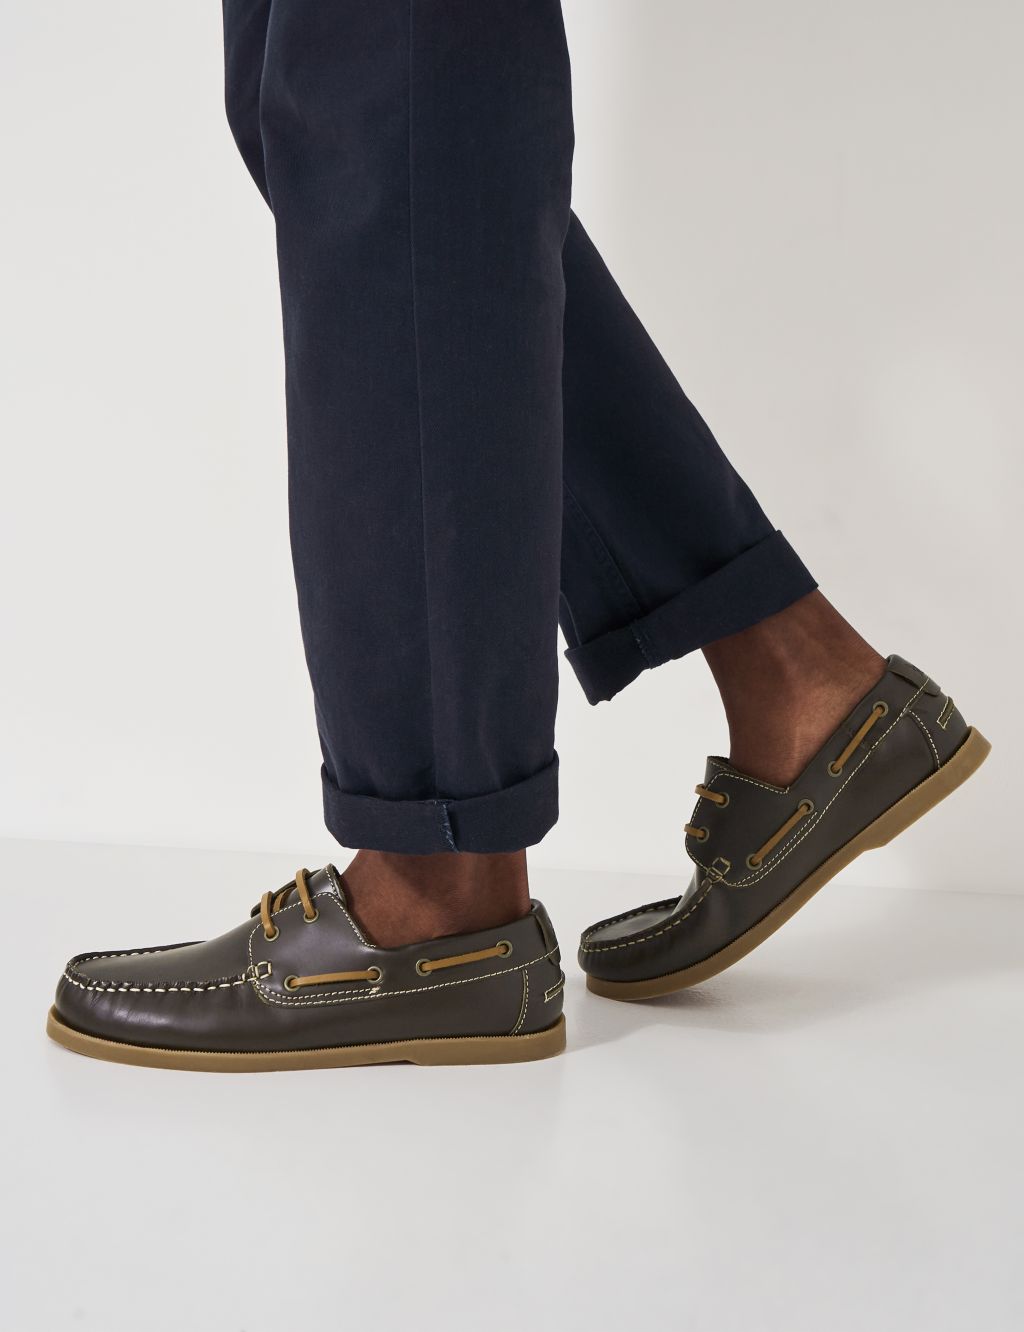 Leather Boat Shoes image 1